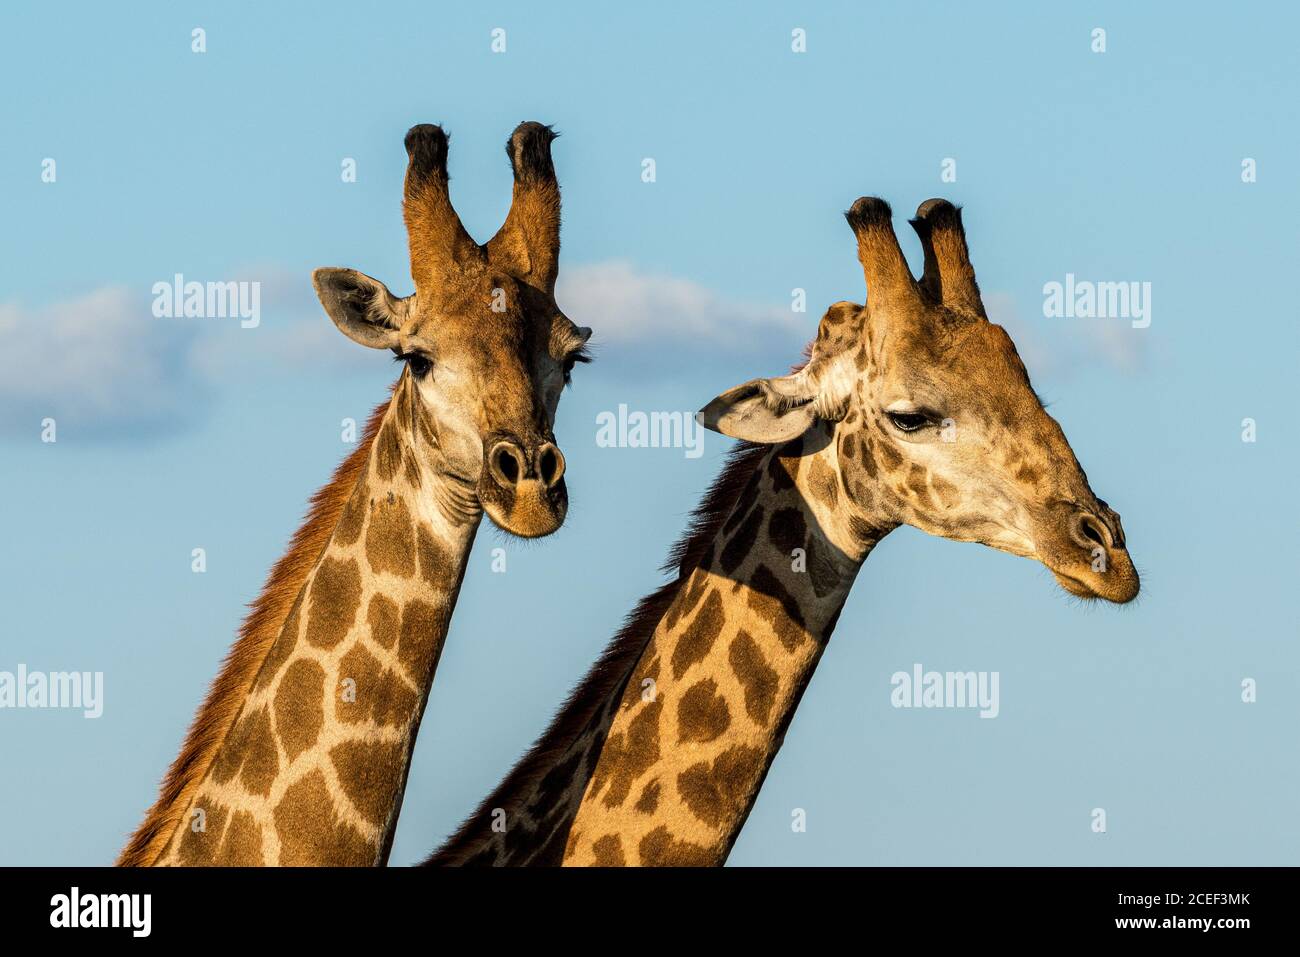 Two male giraffes at sunset in Kruger NP, South Africa Stock Photo